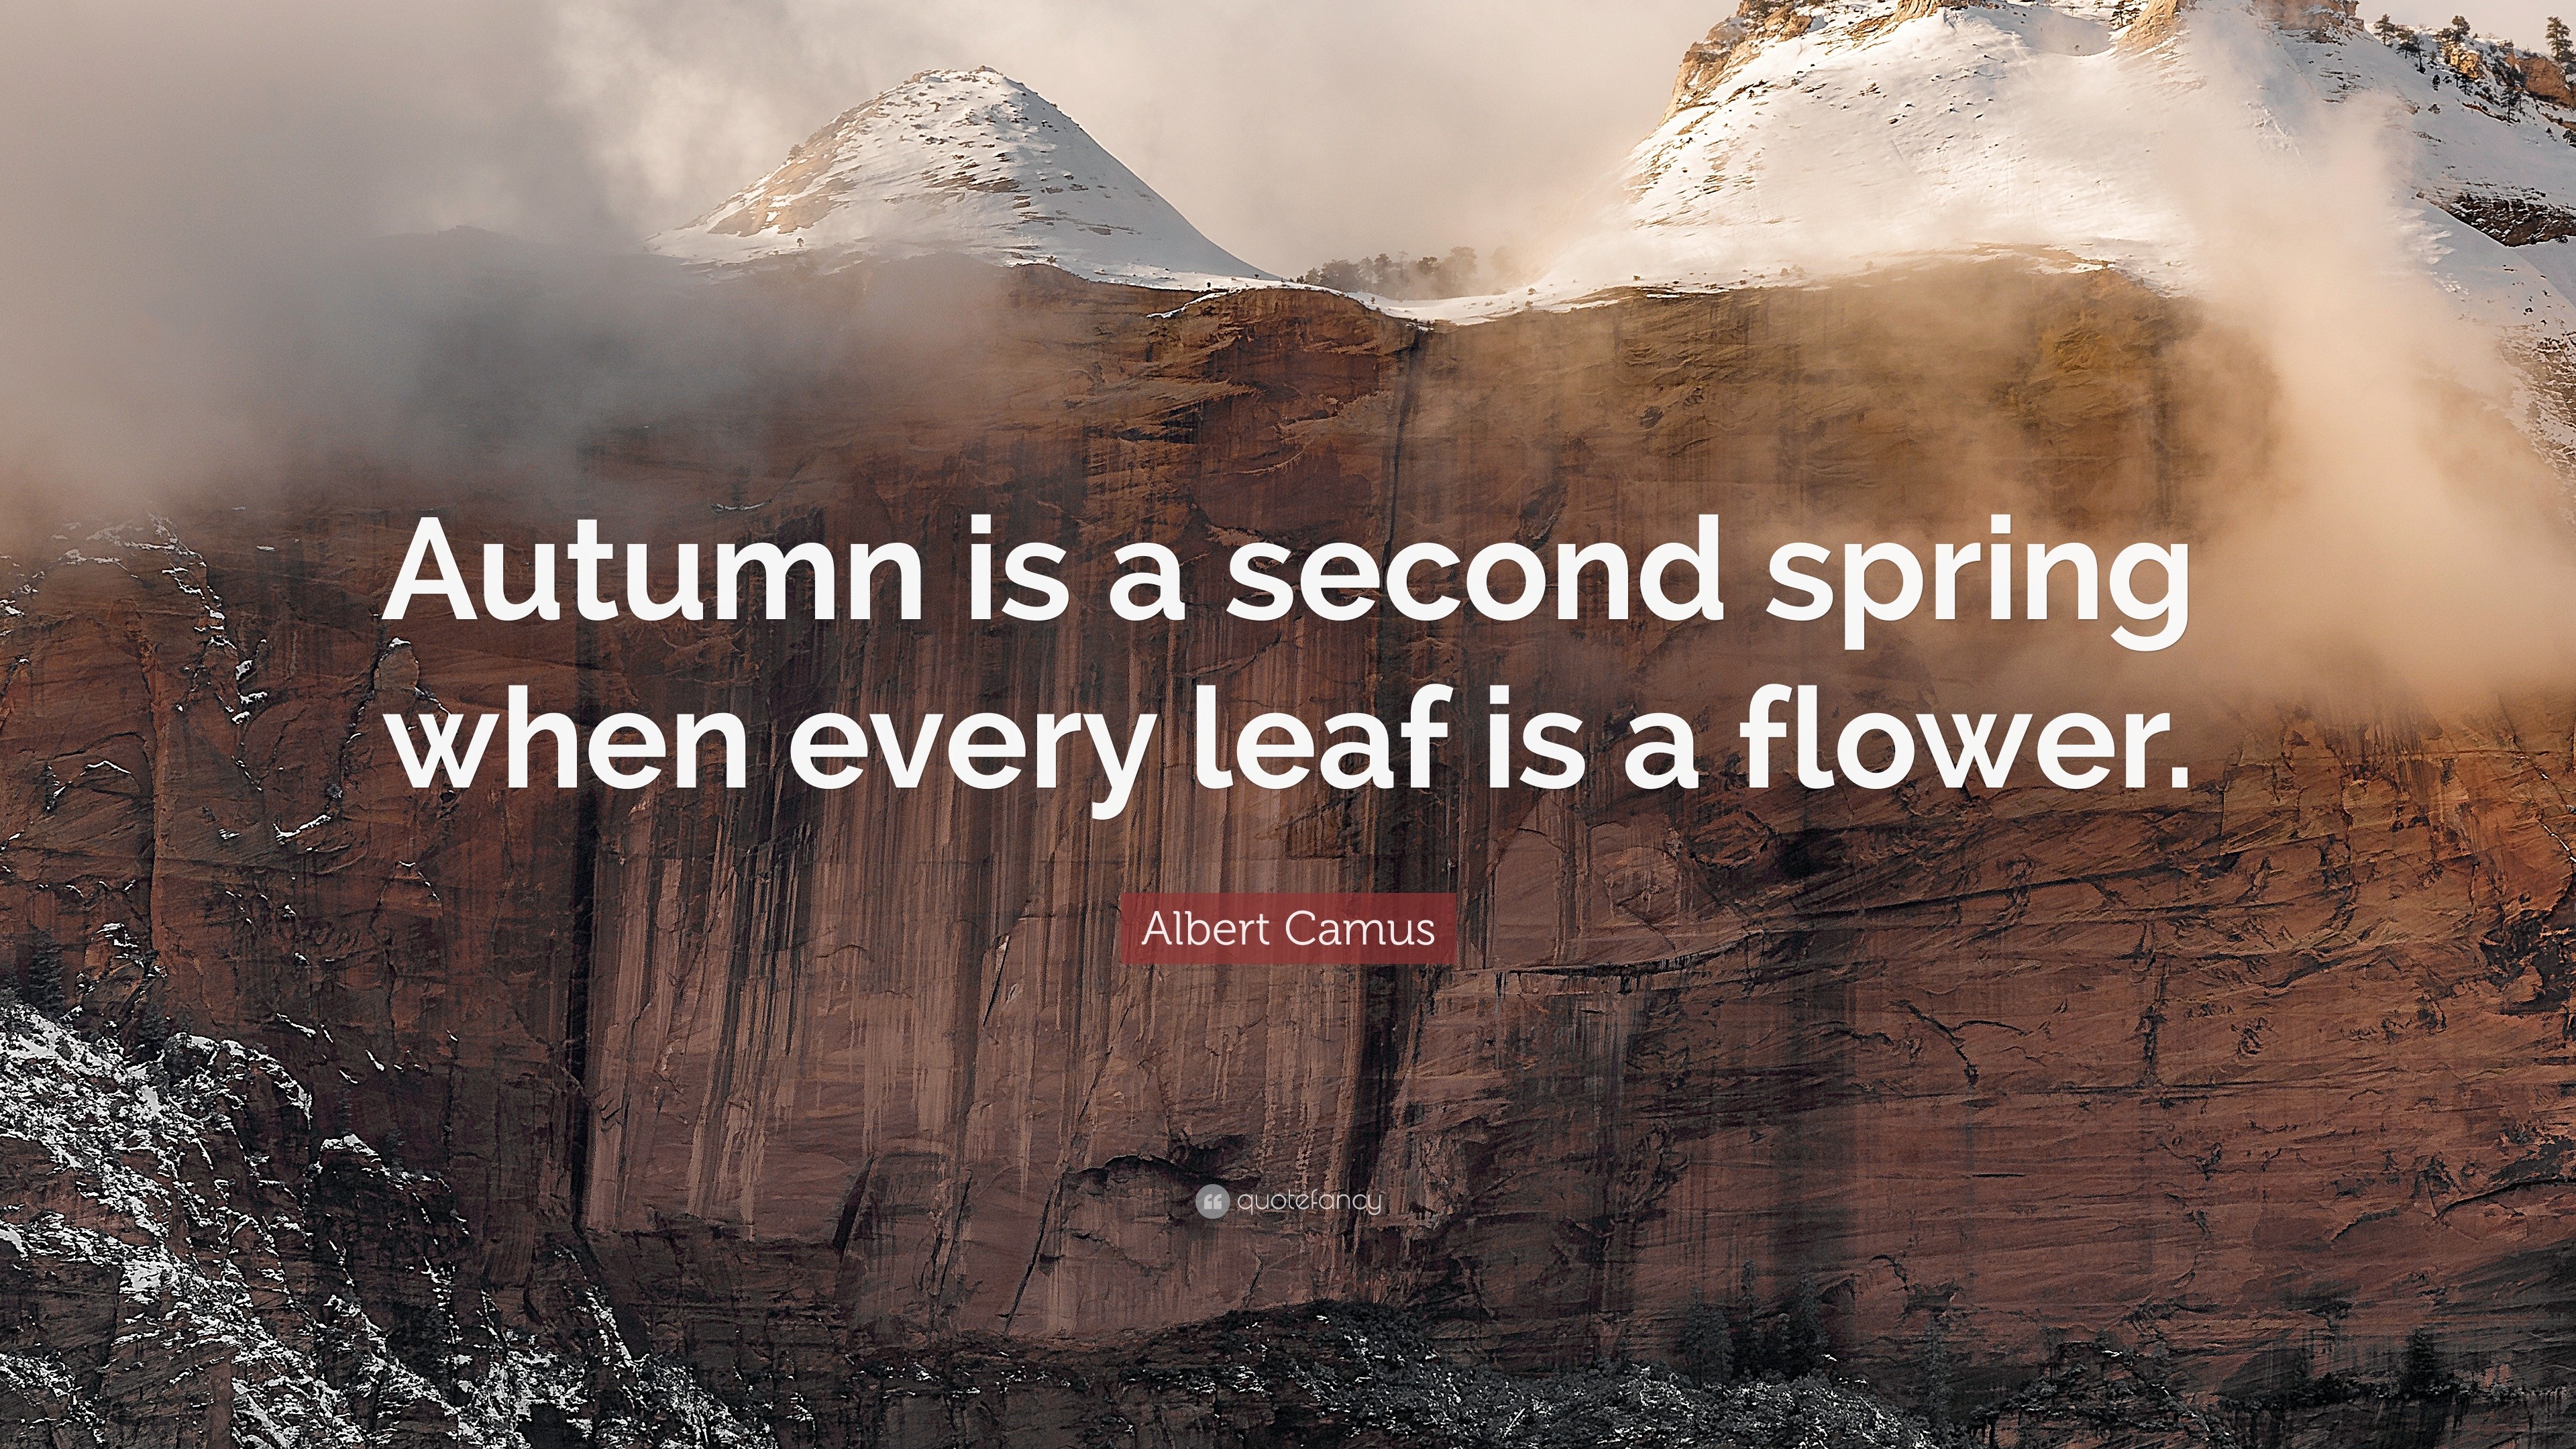 Albert Camus Quote: “Autumn is a second spring when every leaf is a ...